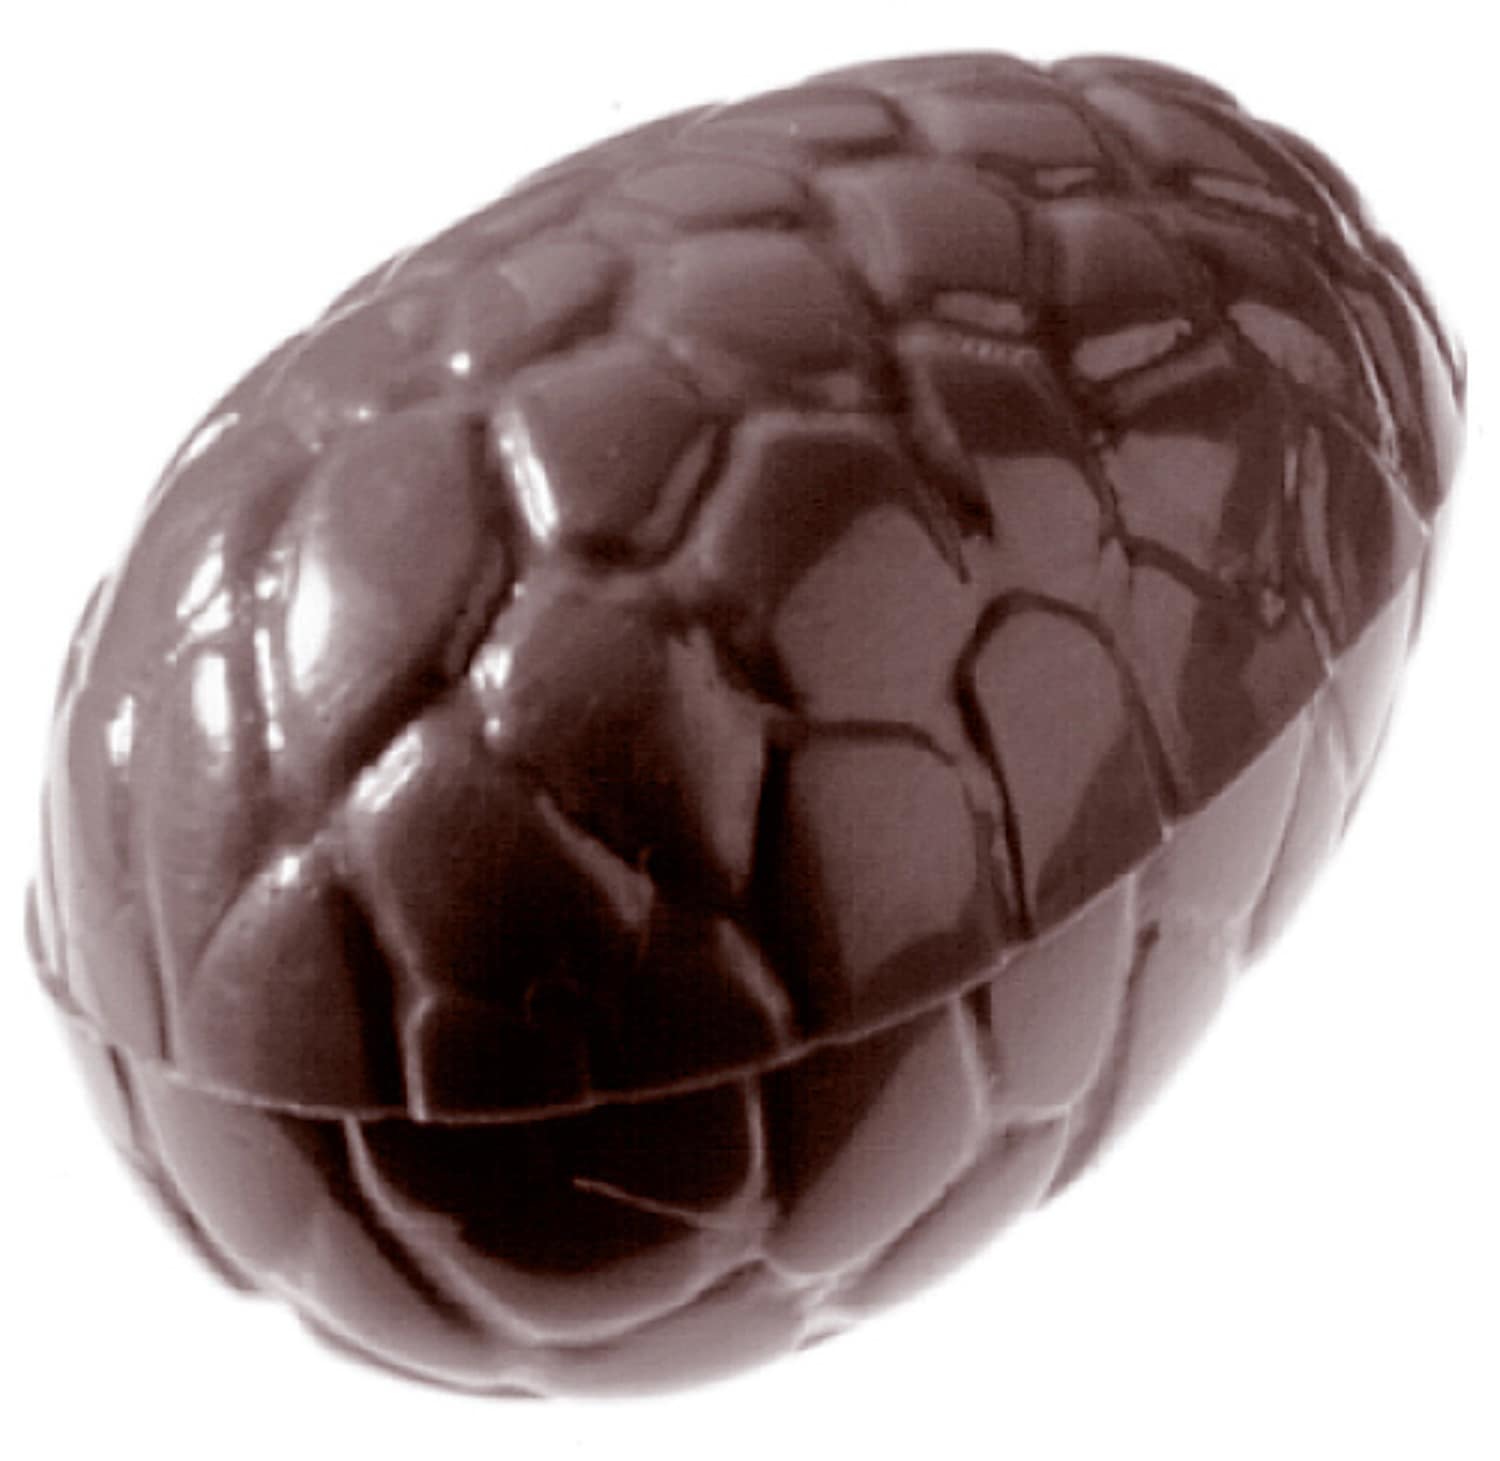 Chocolate mould "Easter egg" 421266